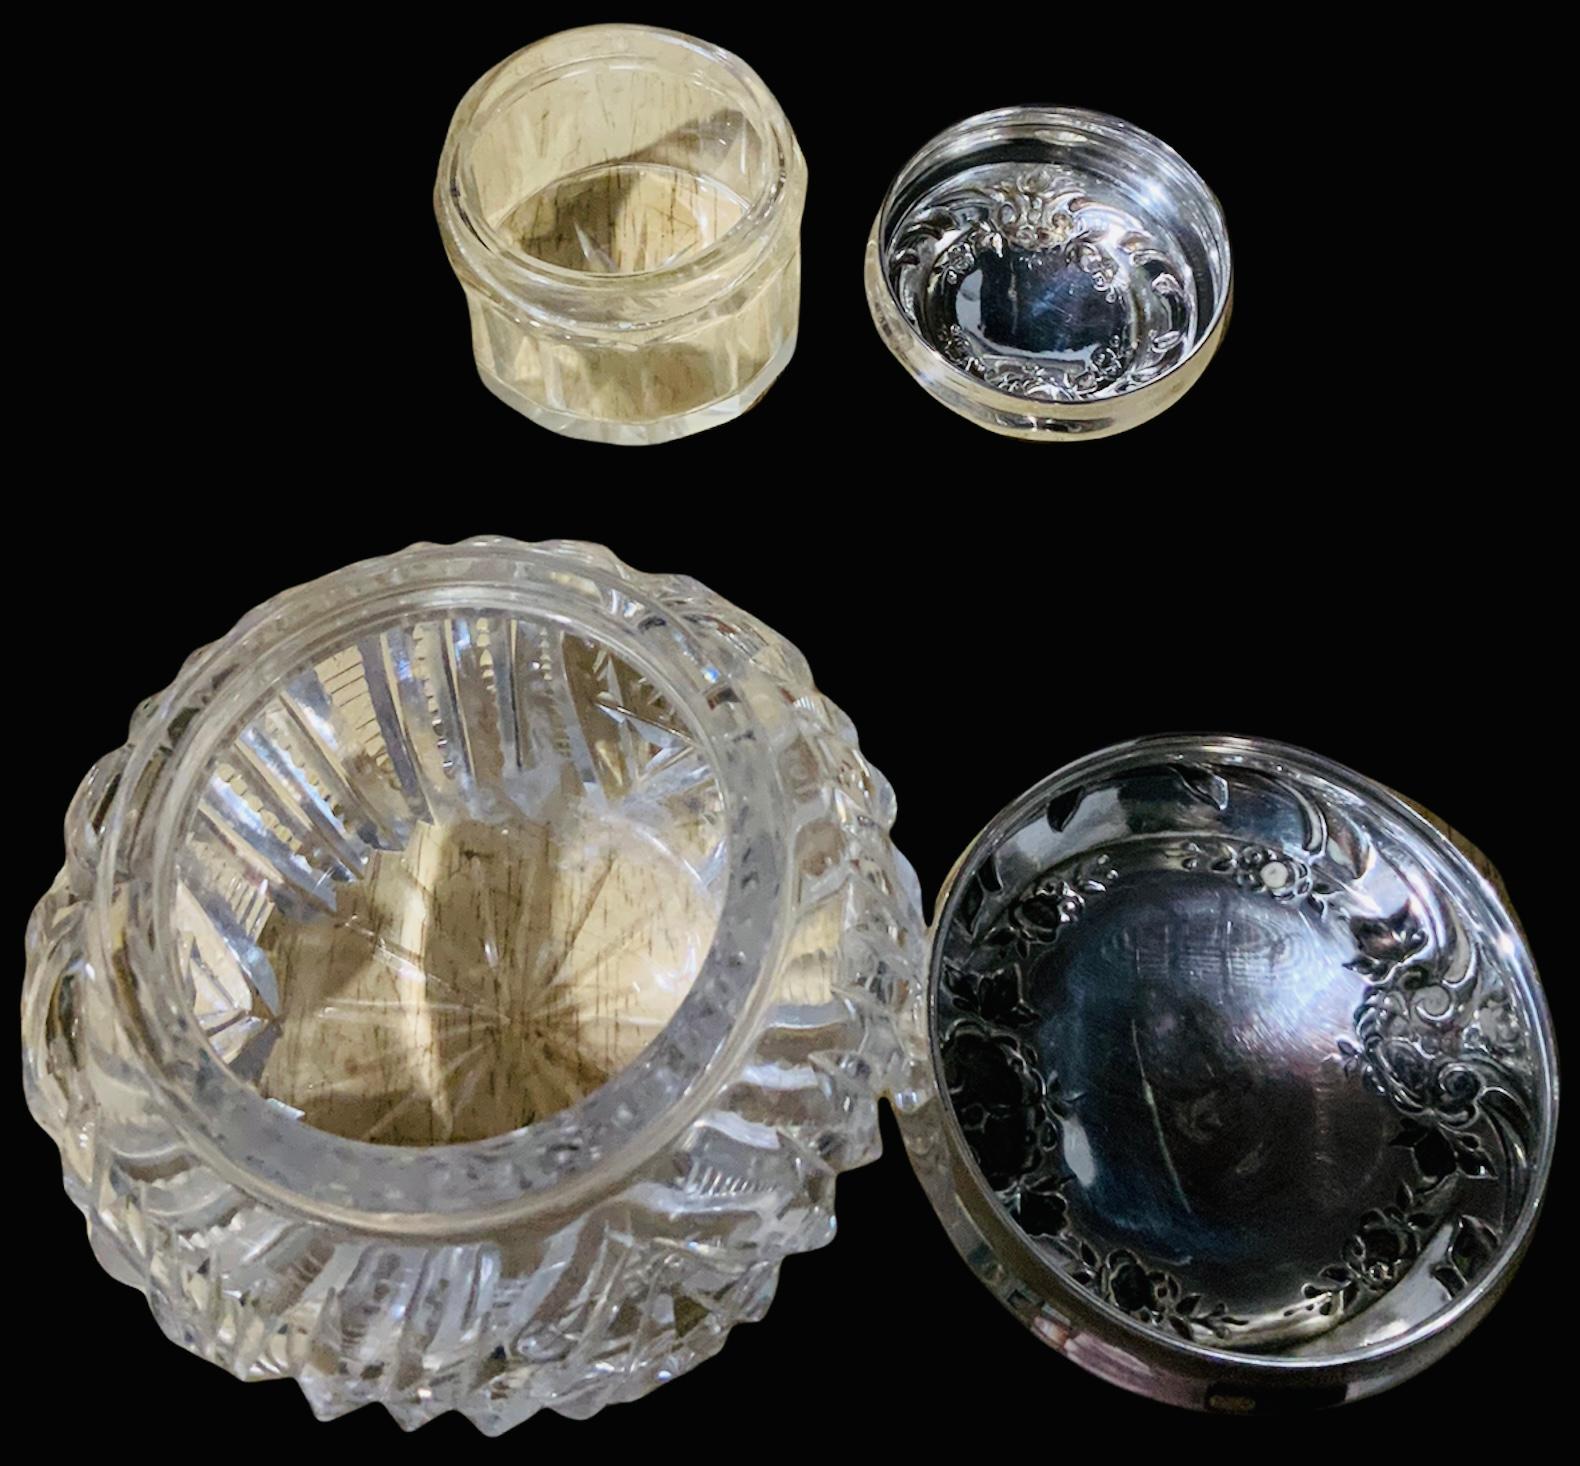 This is an International Sterling Company Vanity set. It depicts a repousse design of pansy flowers and foliage garlands, scrolls of leaves, plain scrolls and hearts. In the middle of these circular or oval garlands, there are the monograms with the